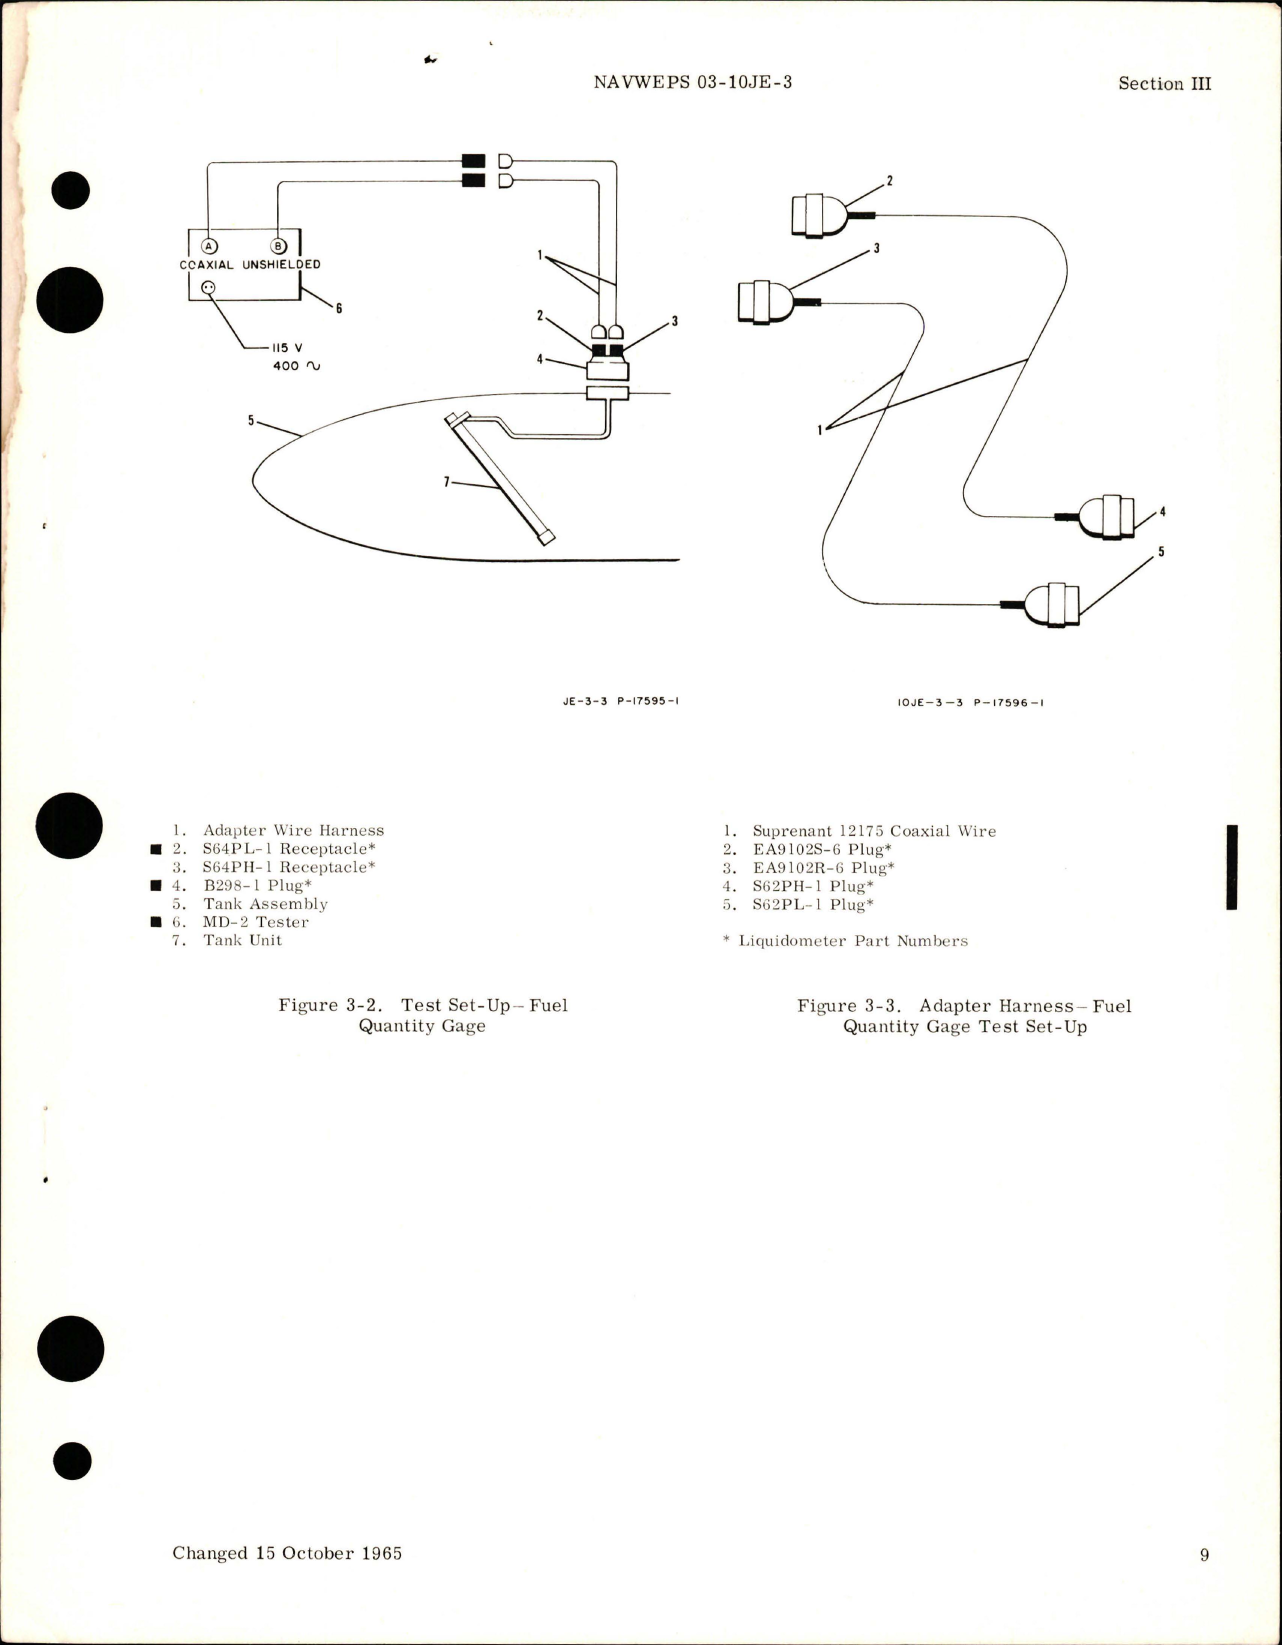 Sample page 7 from AirCorps Library document: Overhaul Instructions for 400 Gallon Fuel Tank - Parts 5556400, 5556400-501, and 5556400-503